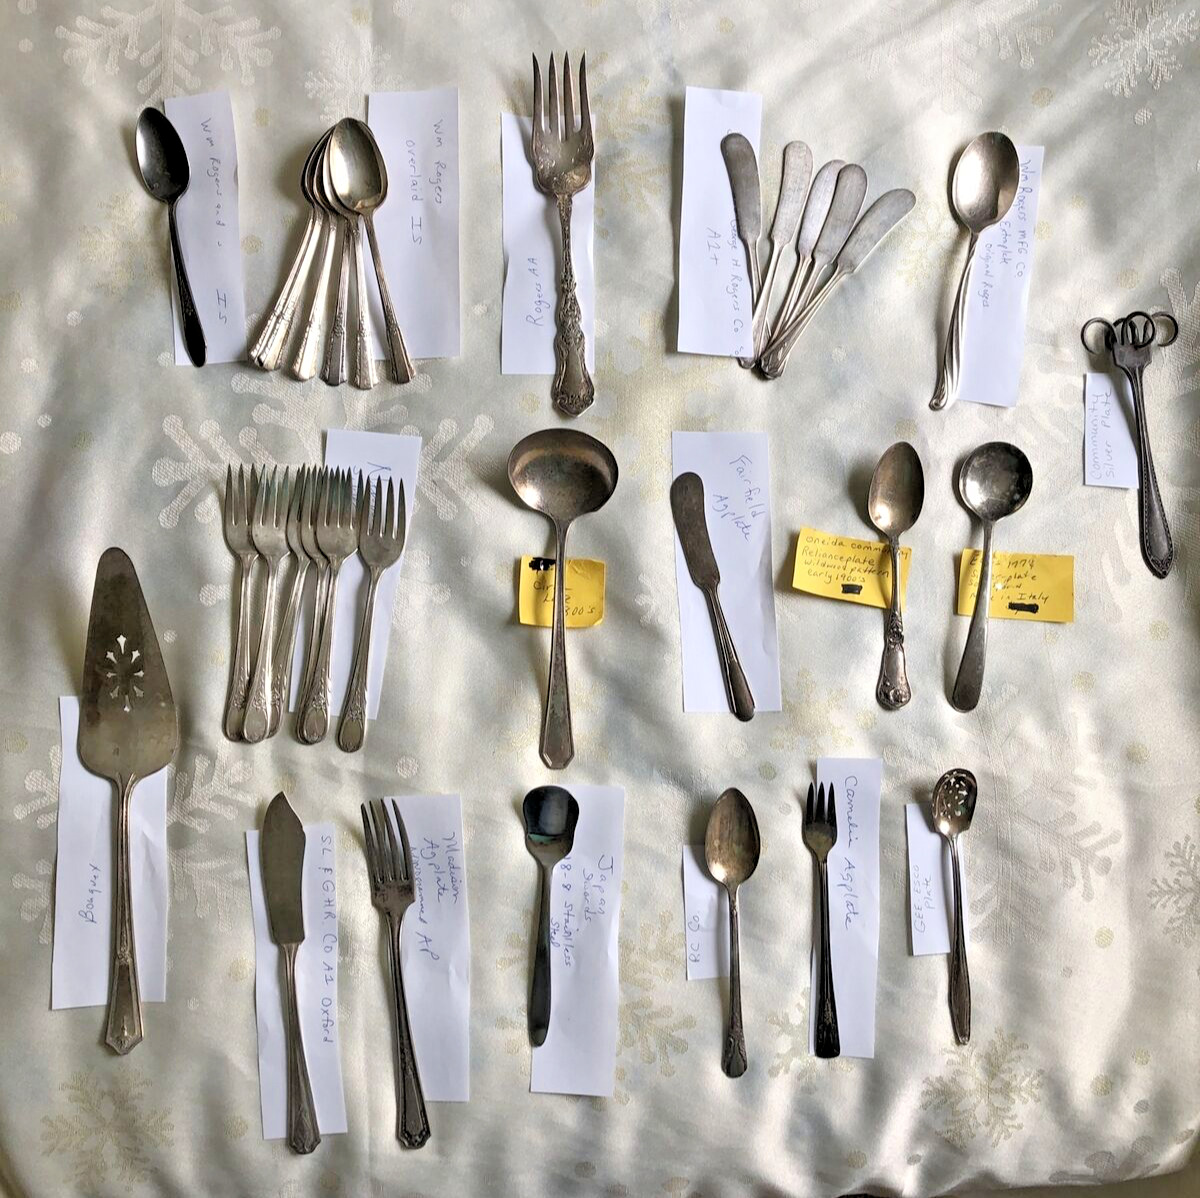 Vintage Antique Silverplate Silverware Flatware Lot 32 pc Serving Matching Mixed